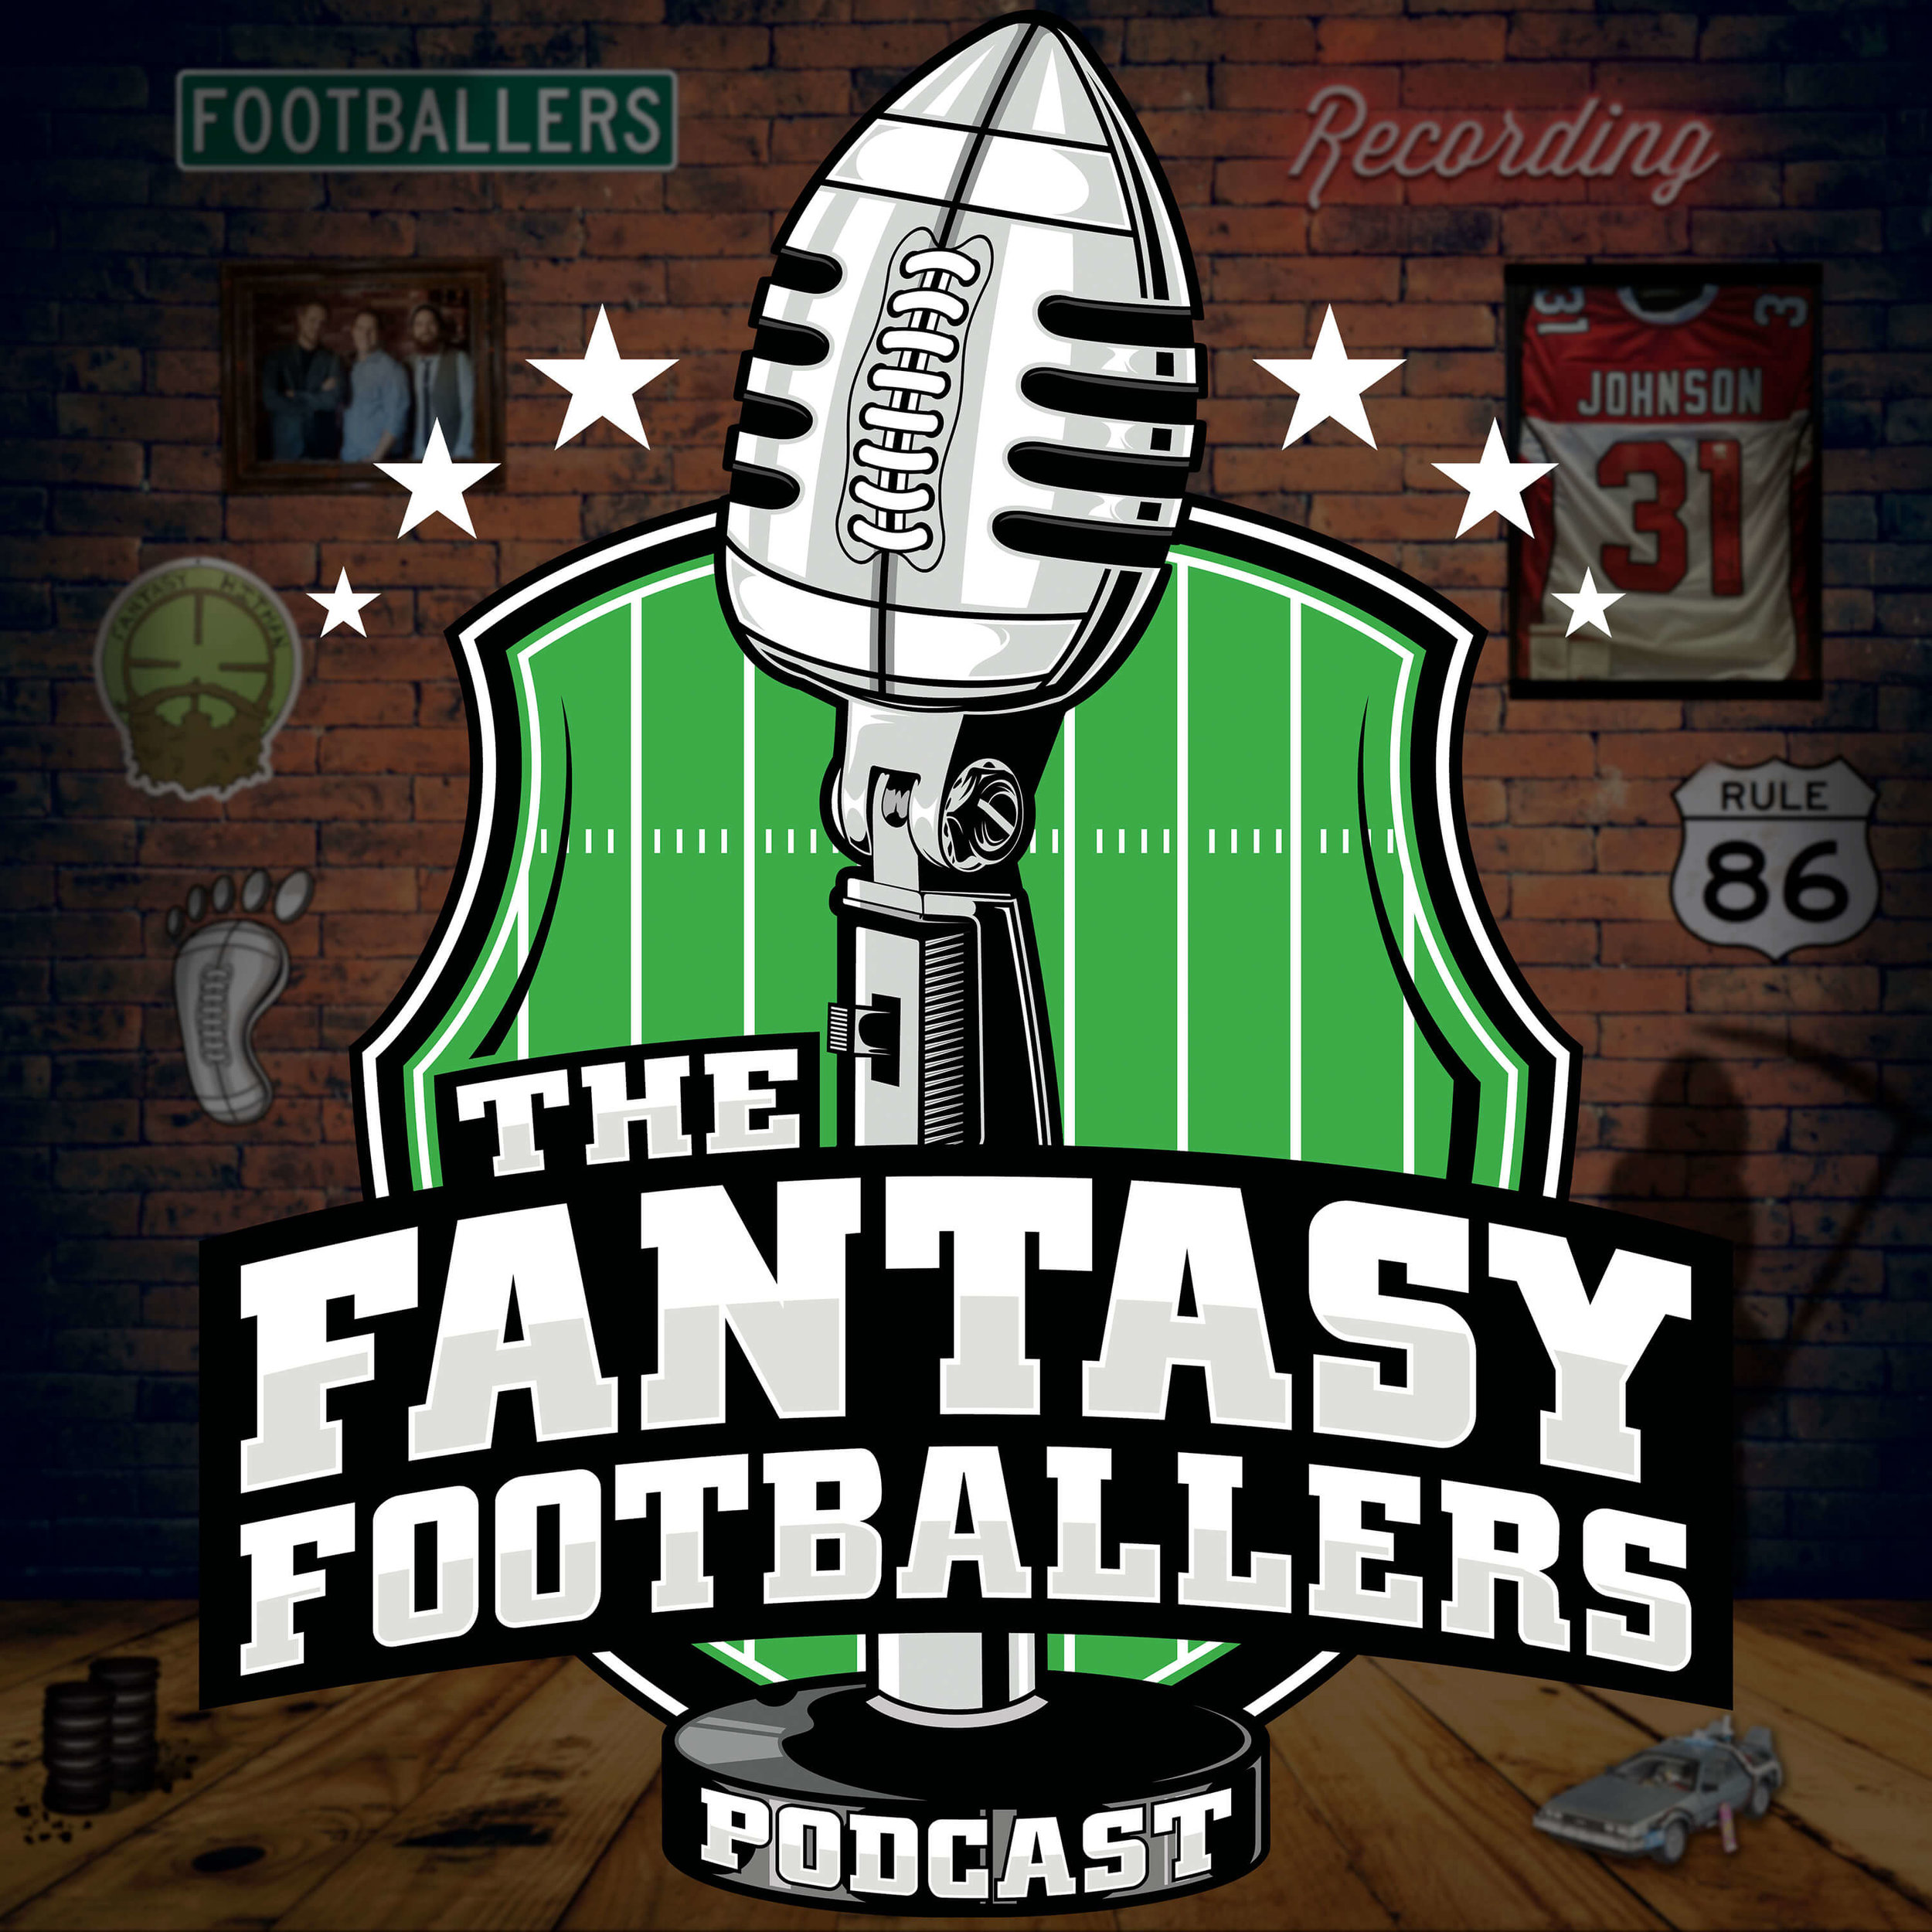 THE FANTASY FOOTBALLERS